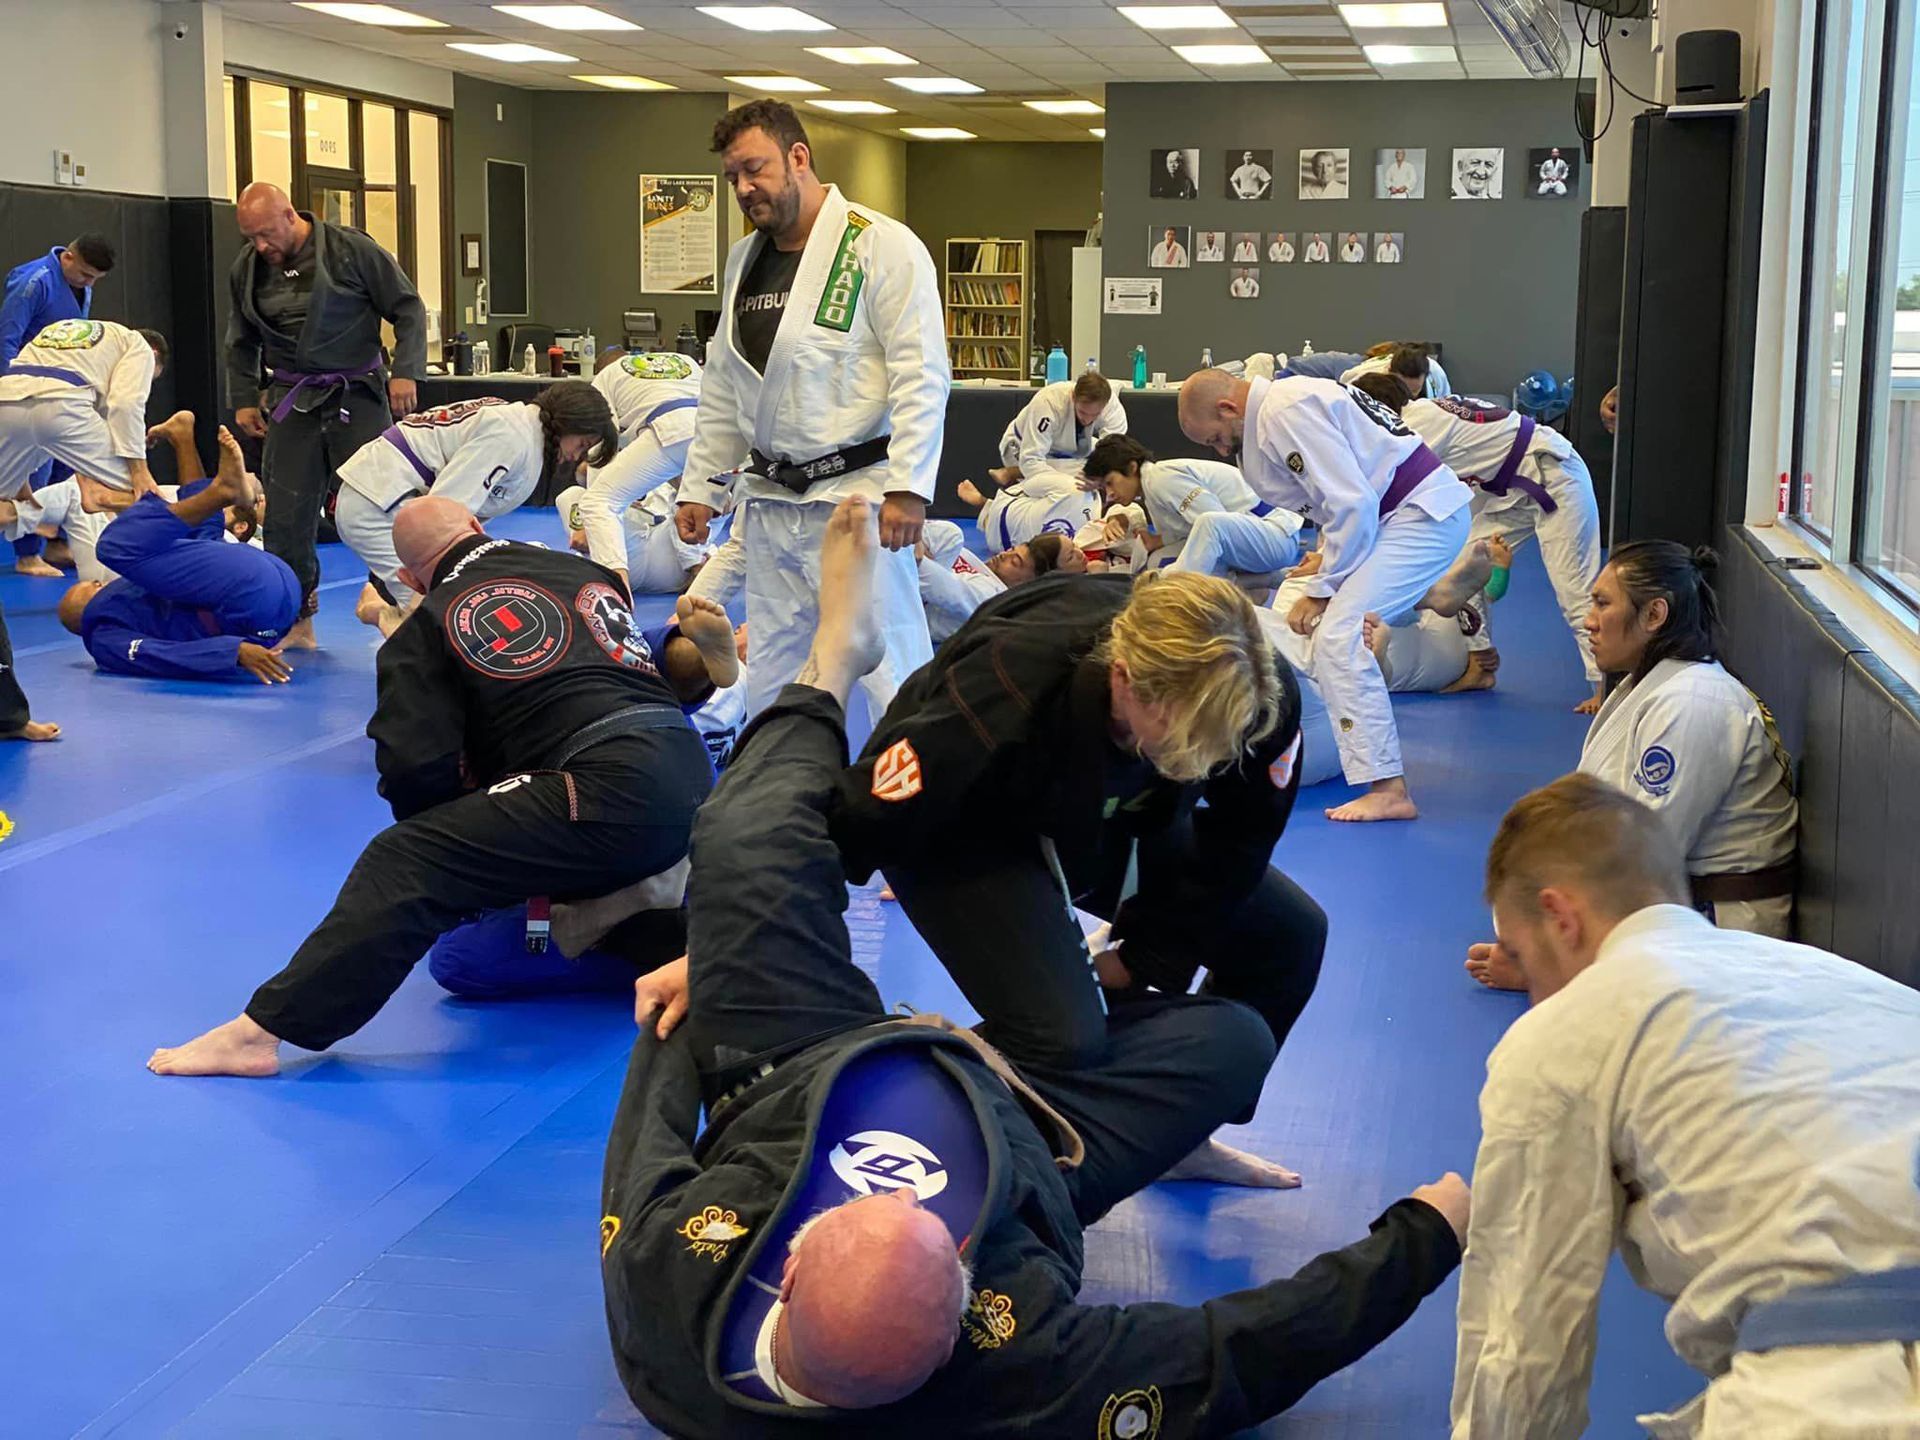 a group of people are practicing jiu jitsu in a gym .